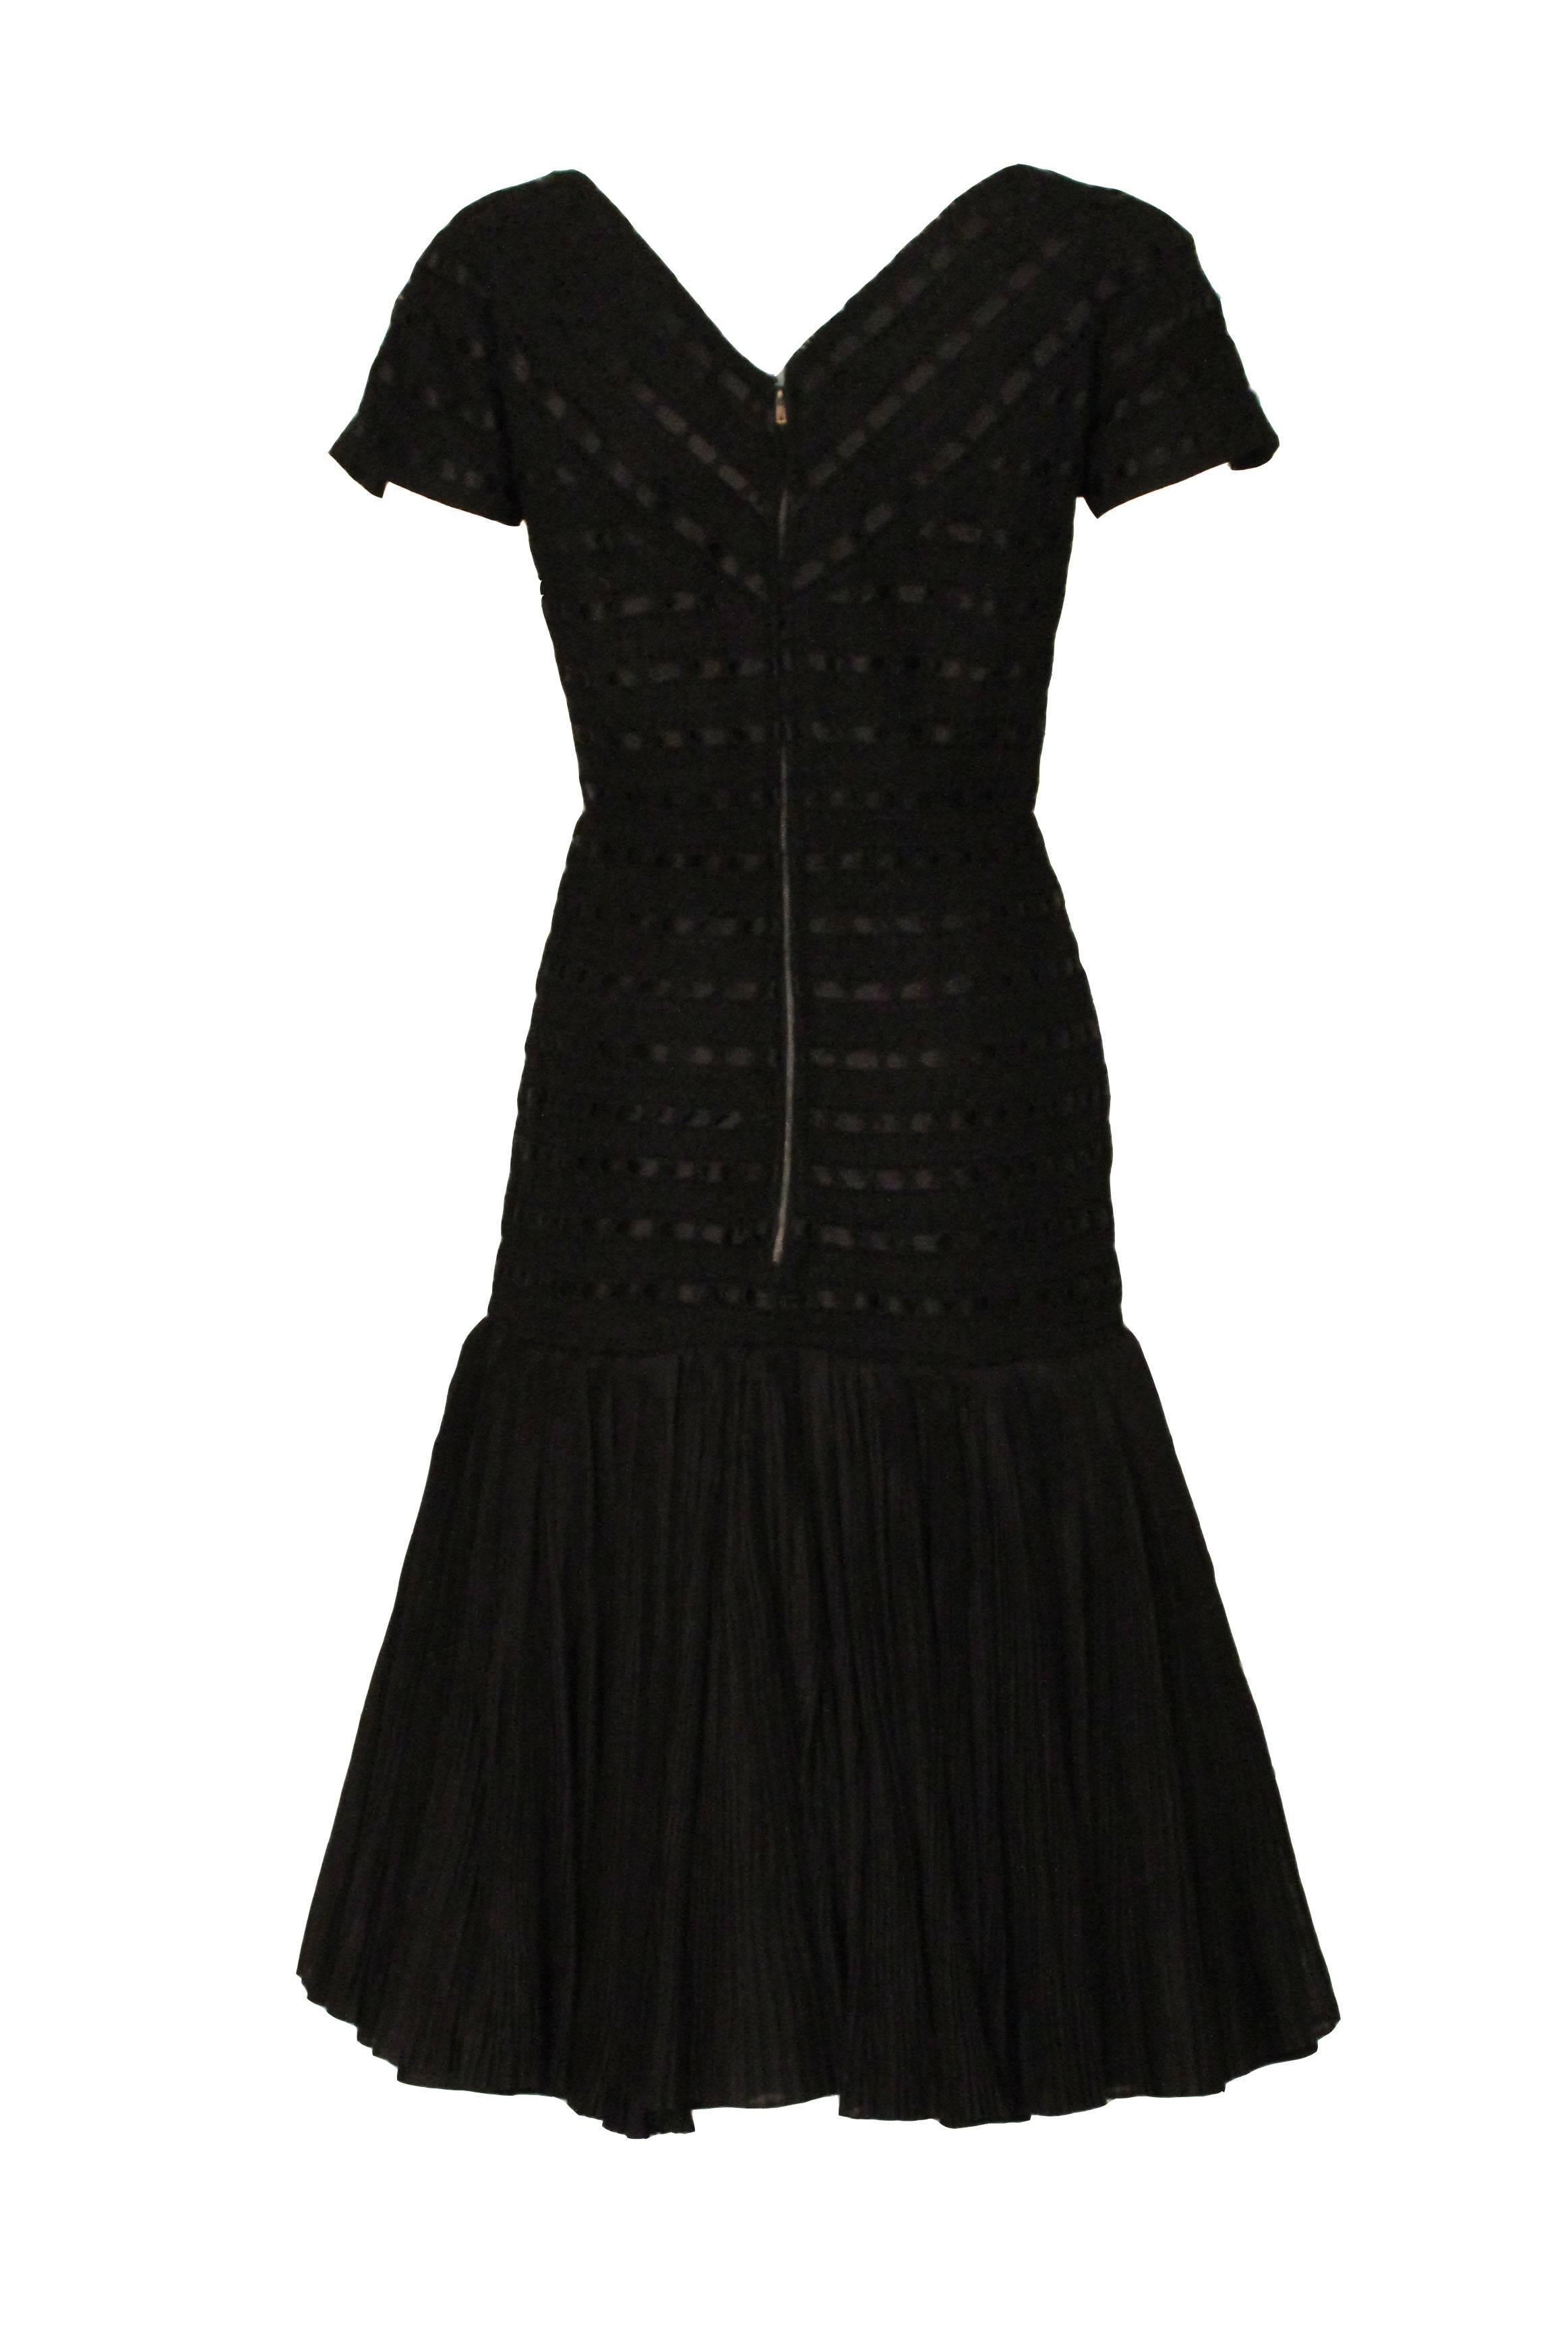 Black 1950s Sybill Connolly Couture Crochet and Ribbon Dress